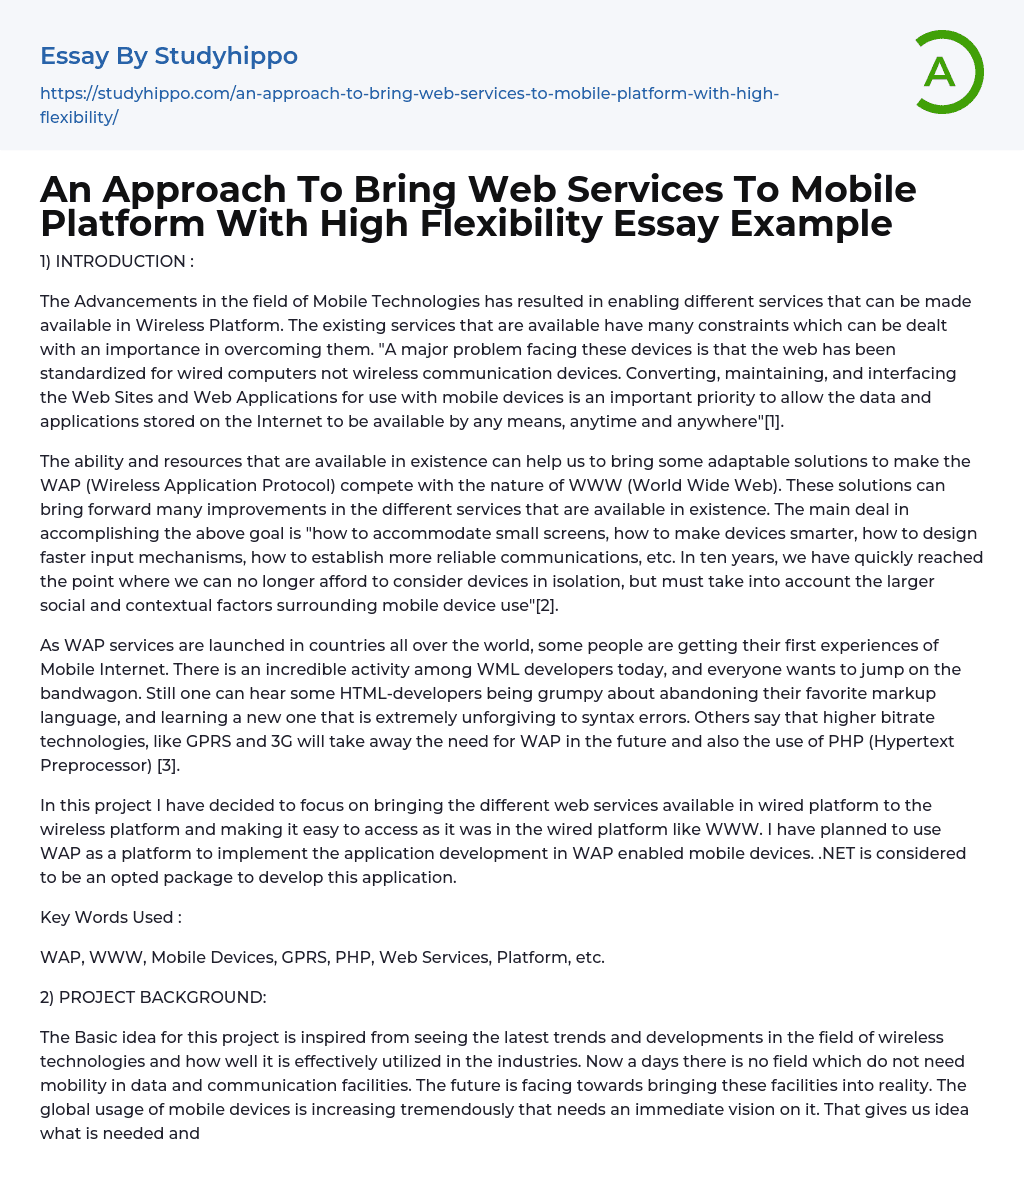 An Approach To Bring Web Services To Mobile Platform With High Flexibility Essay Example